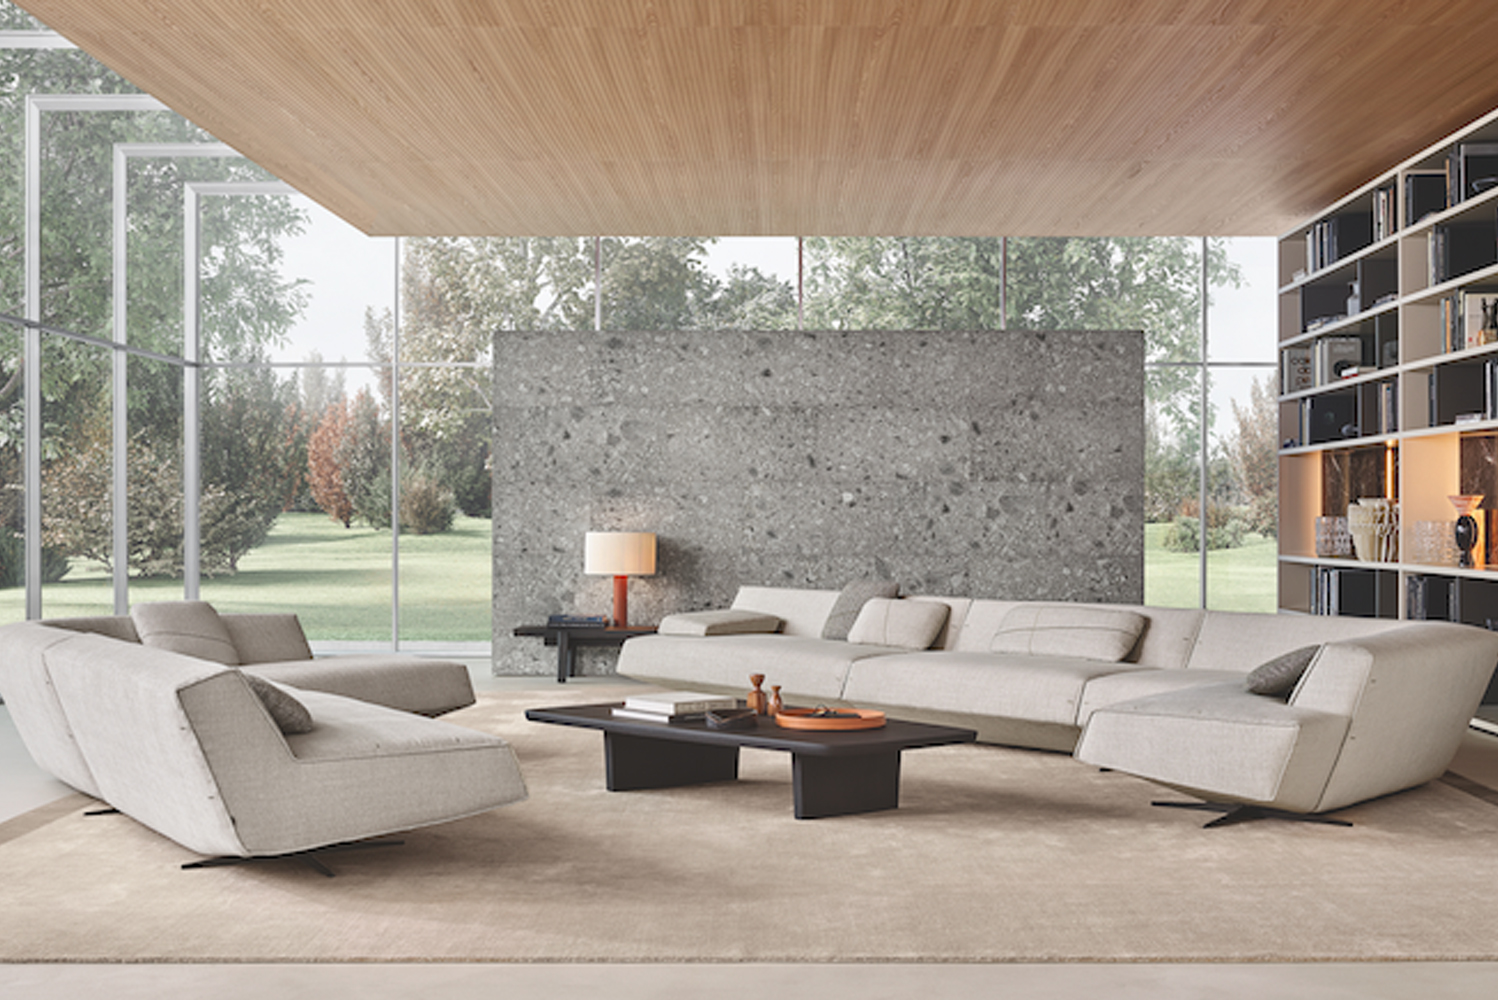 Poliform launched the Sydney collection taking its name from the city in Australia and designed by Jean-Marie Massaud